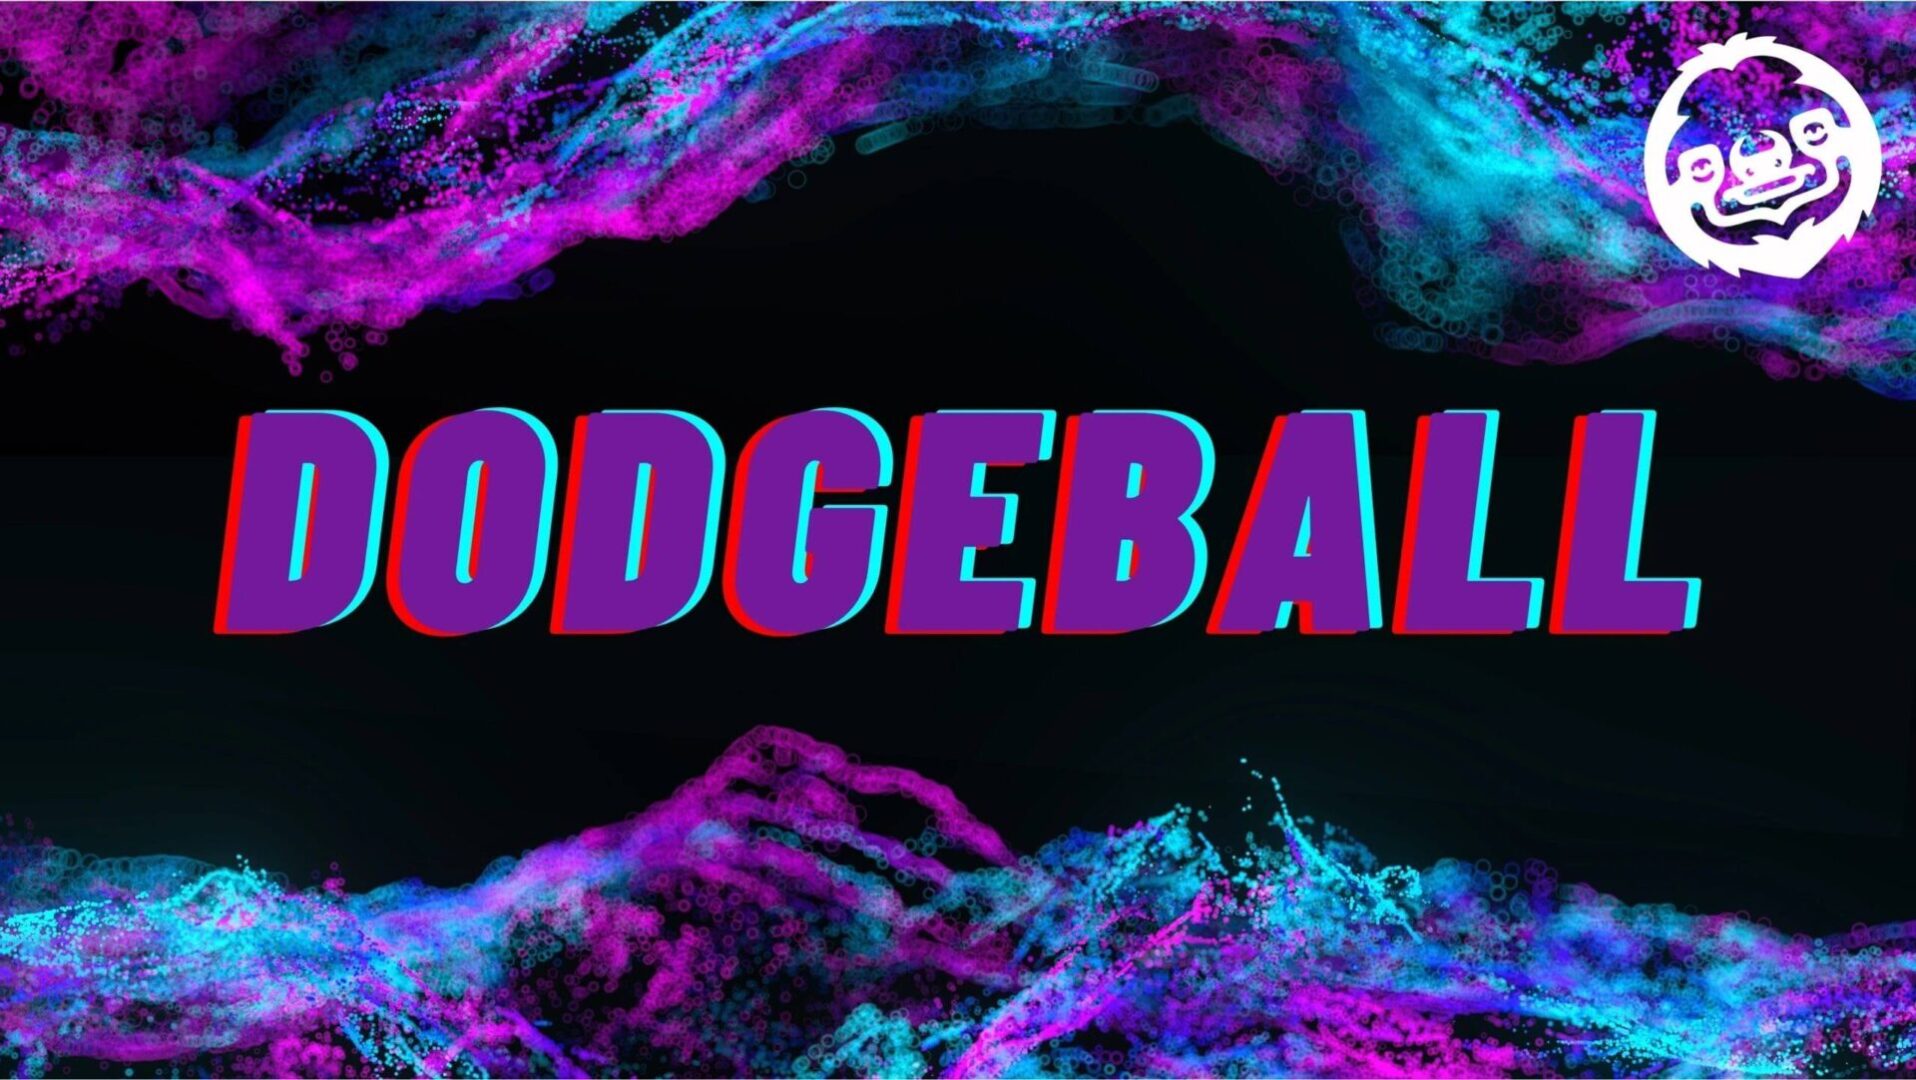 A neon sign that says dodgeball in front of some water.